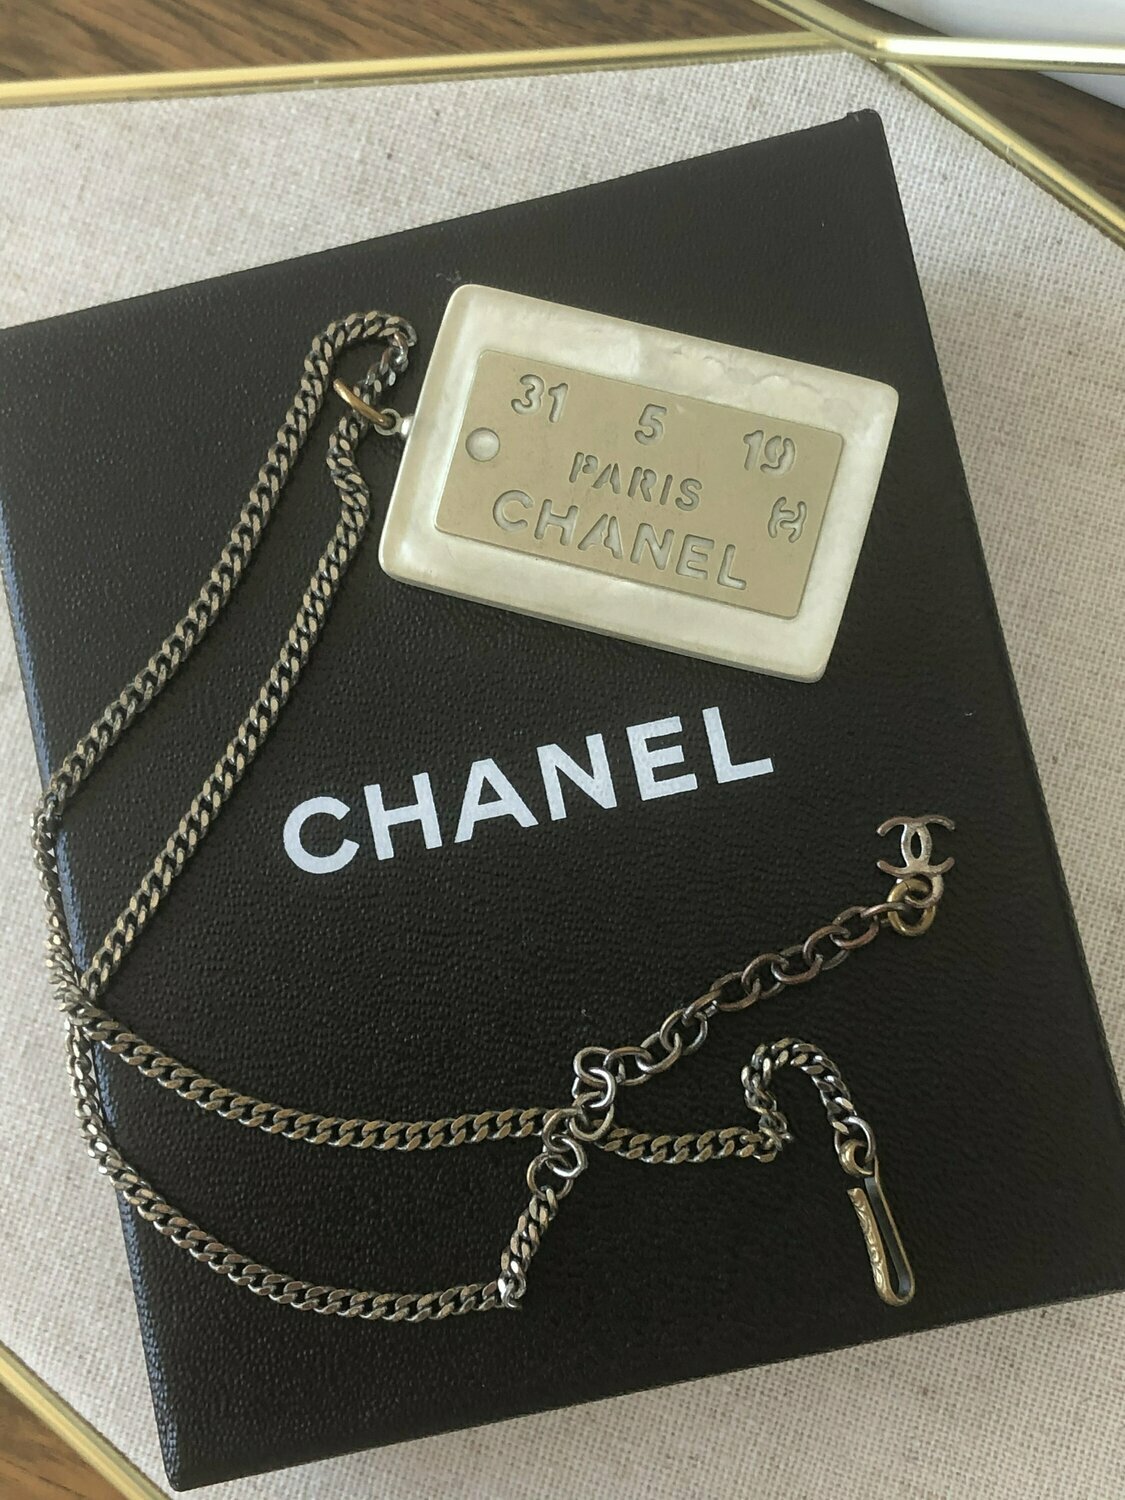 Vintage CHANEL PARIS Silver ID Plate Jumbo Charm Pendant Necklace Jewelry  Dog Tag